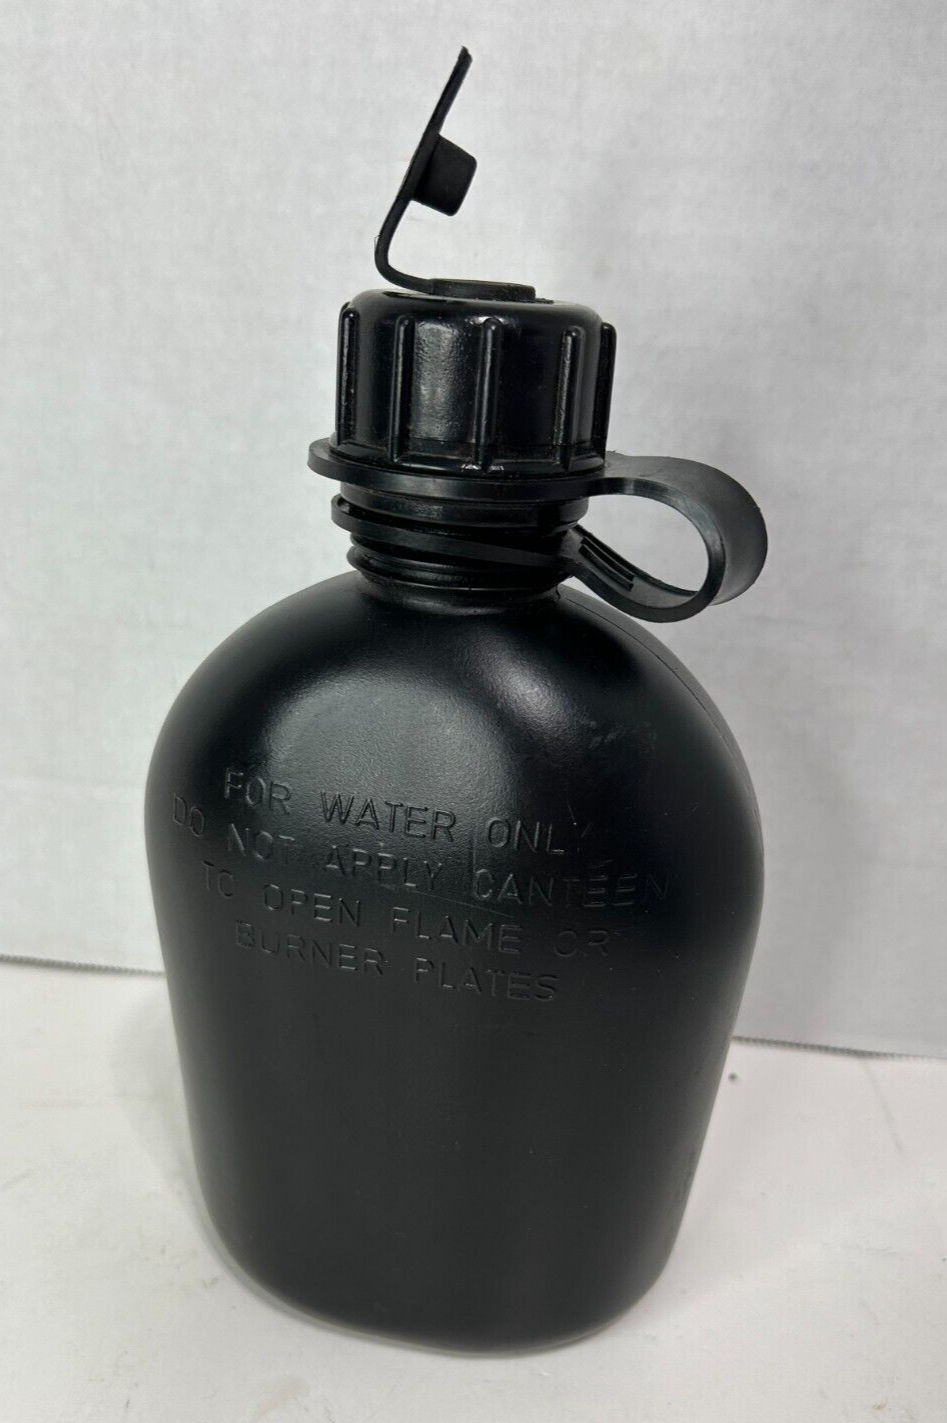 US Army 1-Quart Plastic Water Canteen, Black w/ Drinking Tube Accessible Cap Lid - $17.95